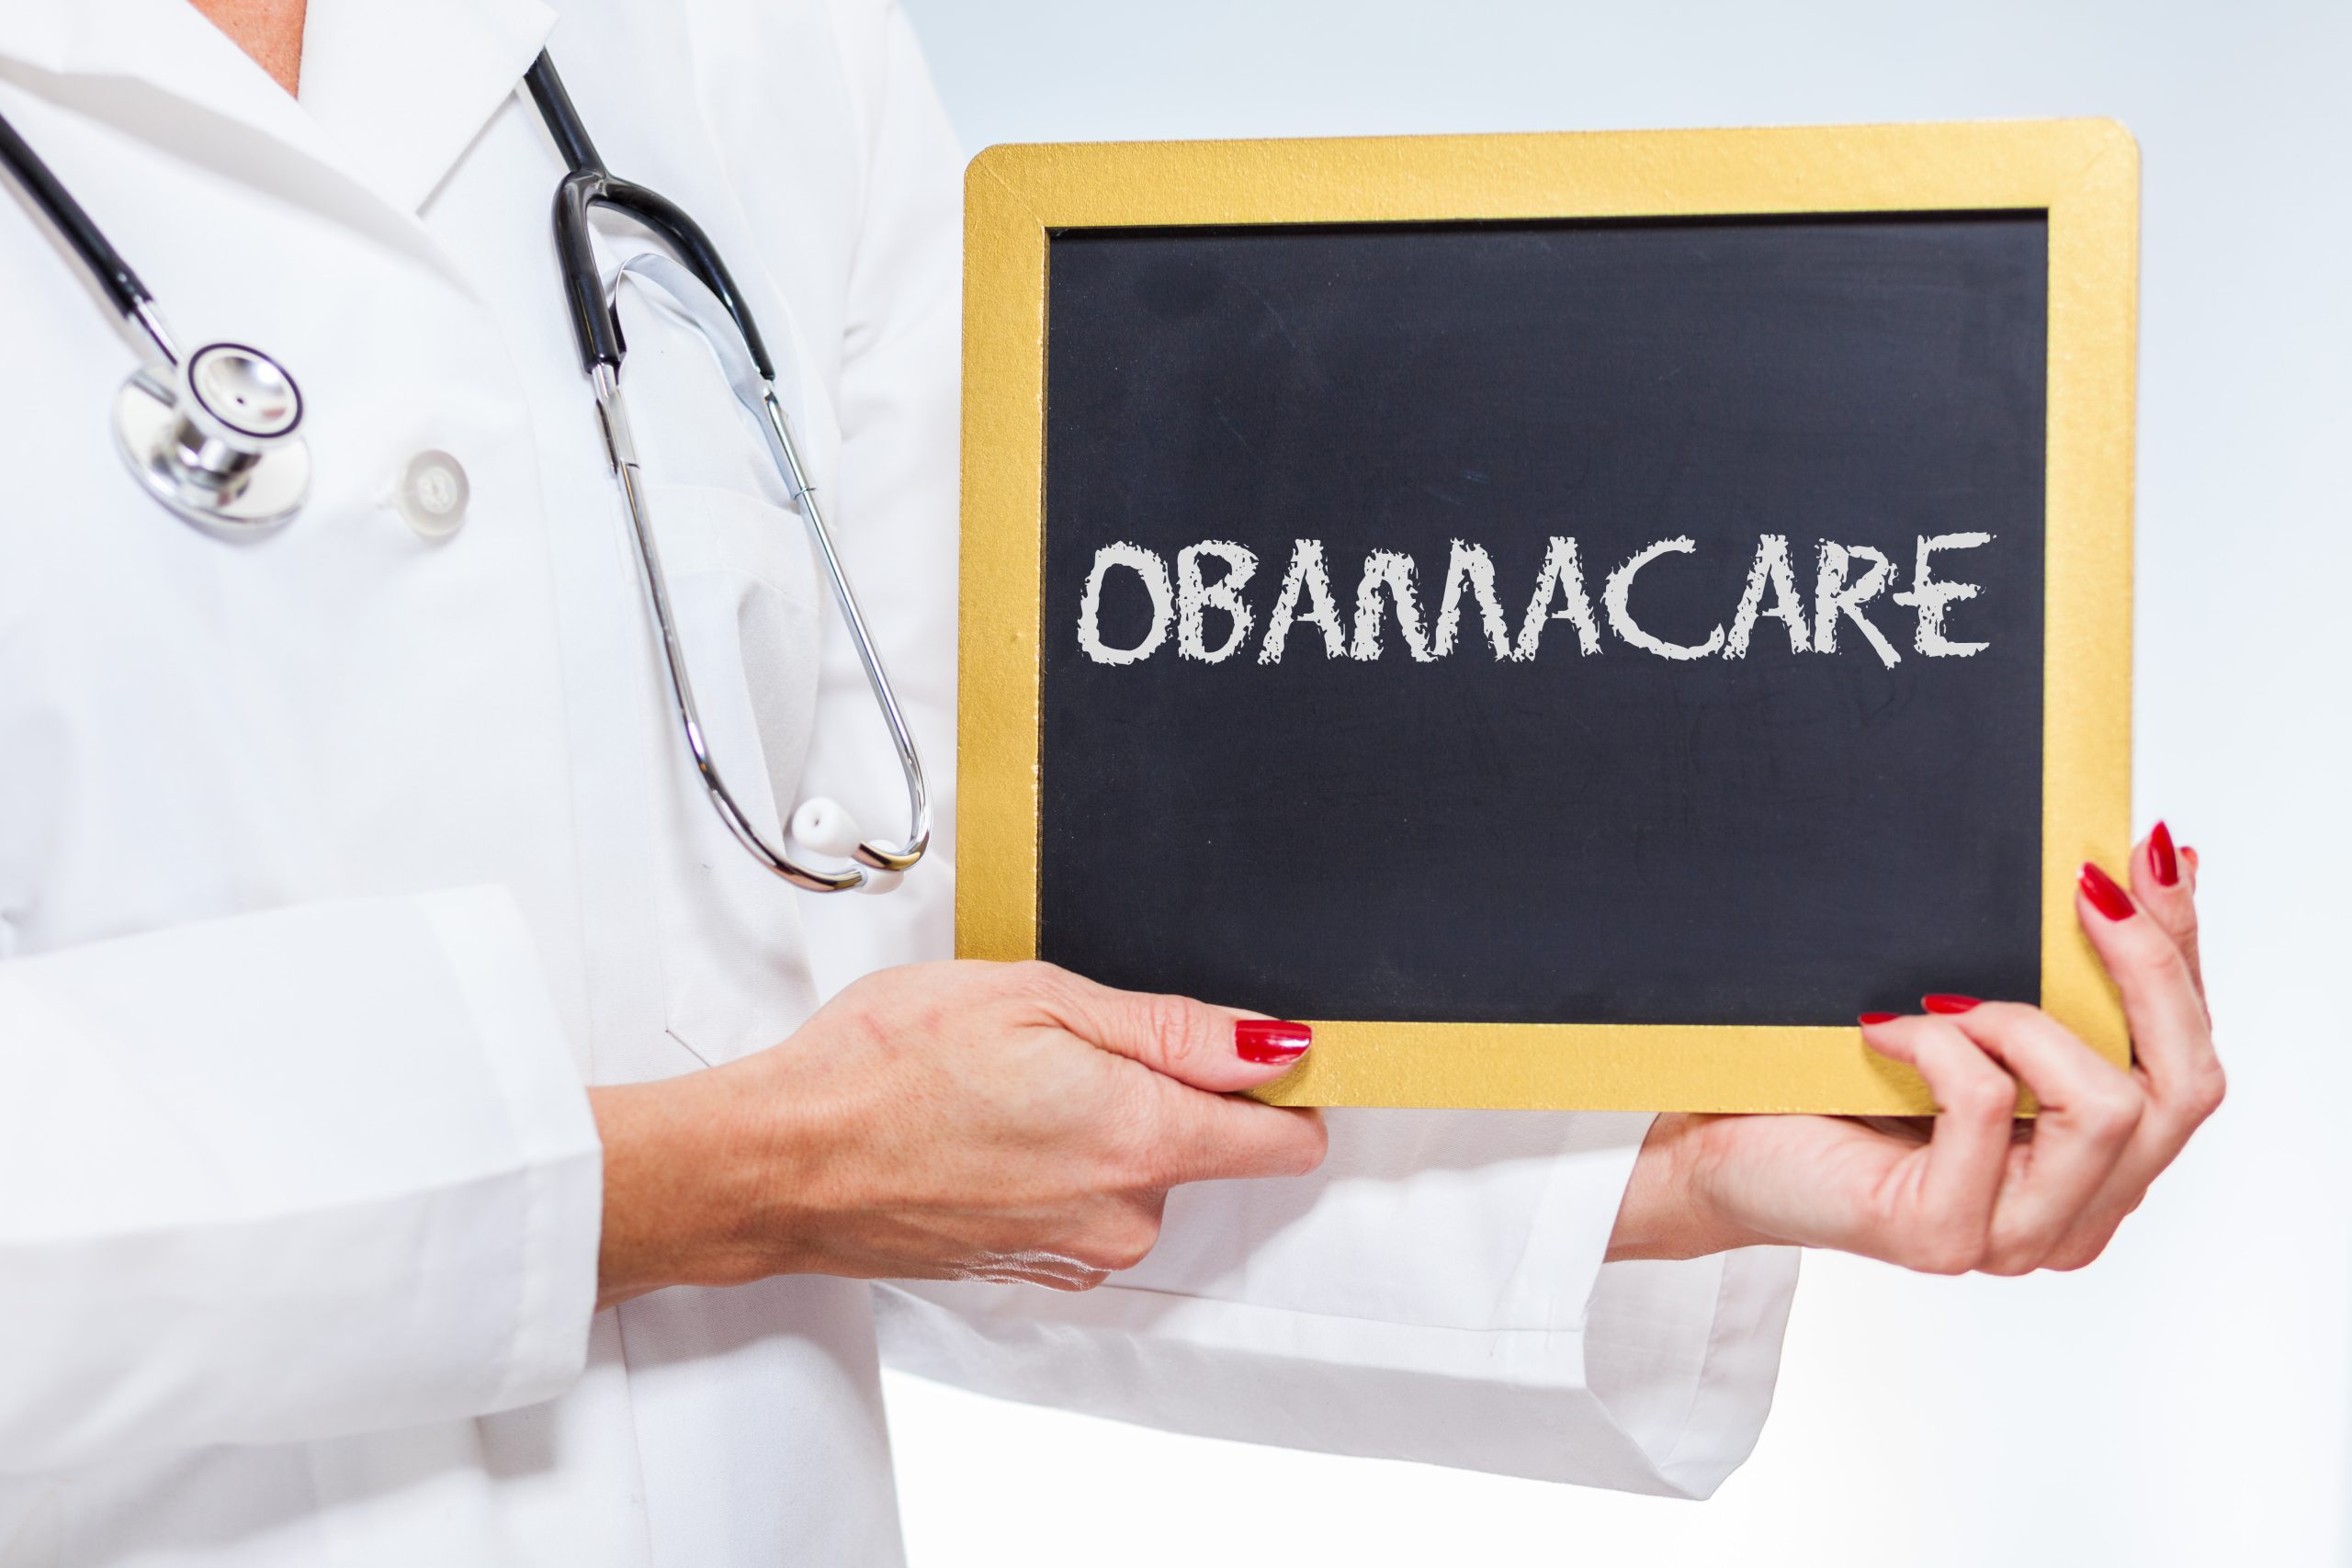 What is Obamacare?